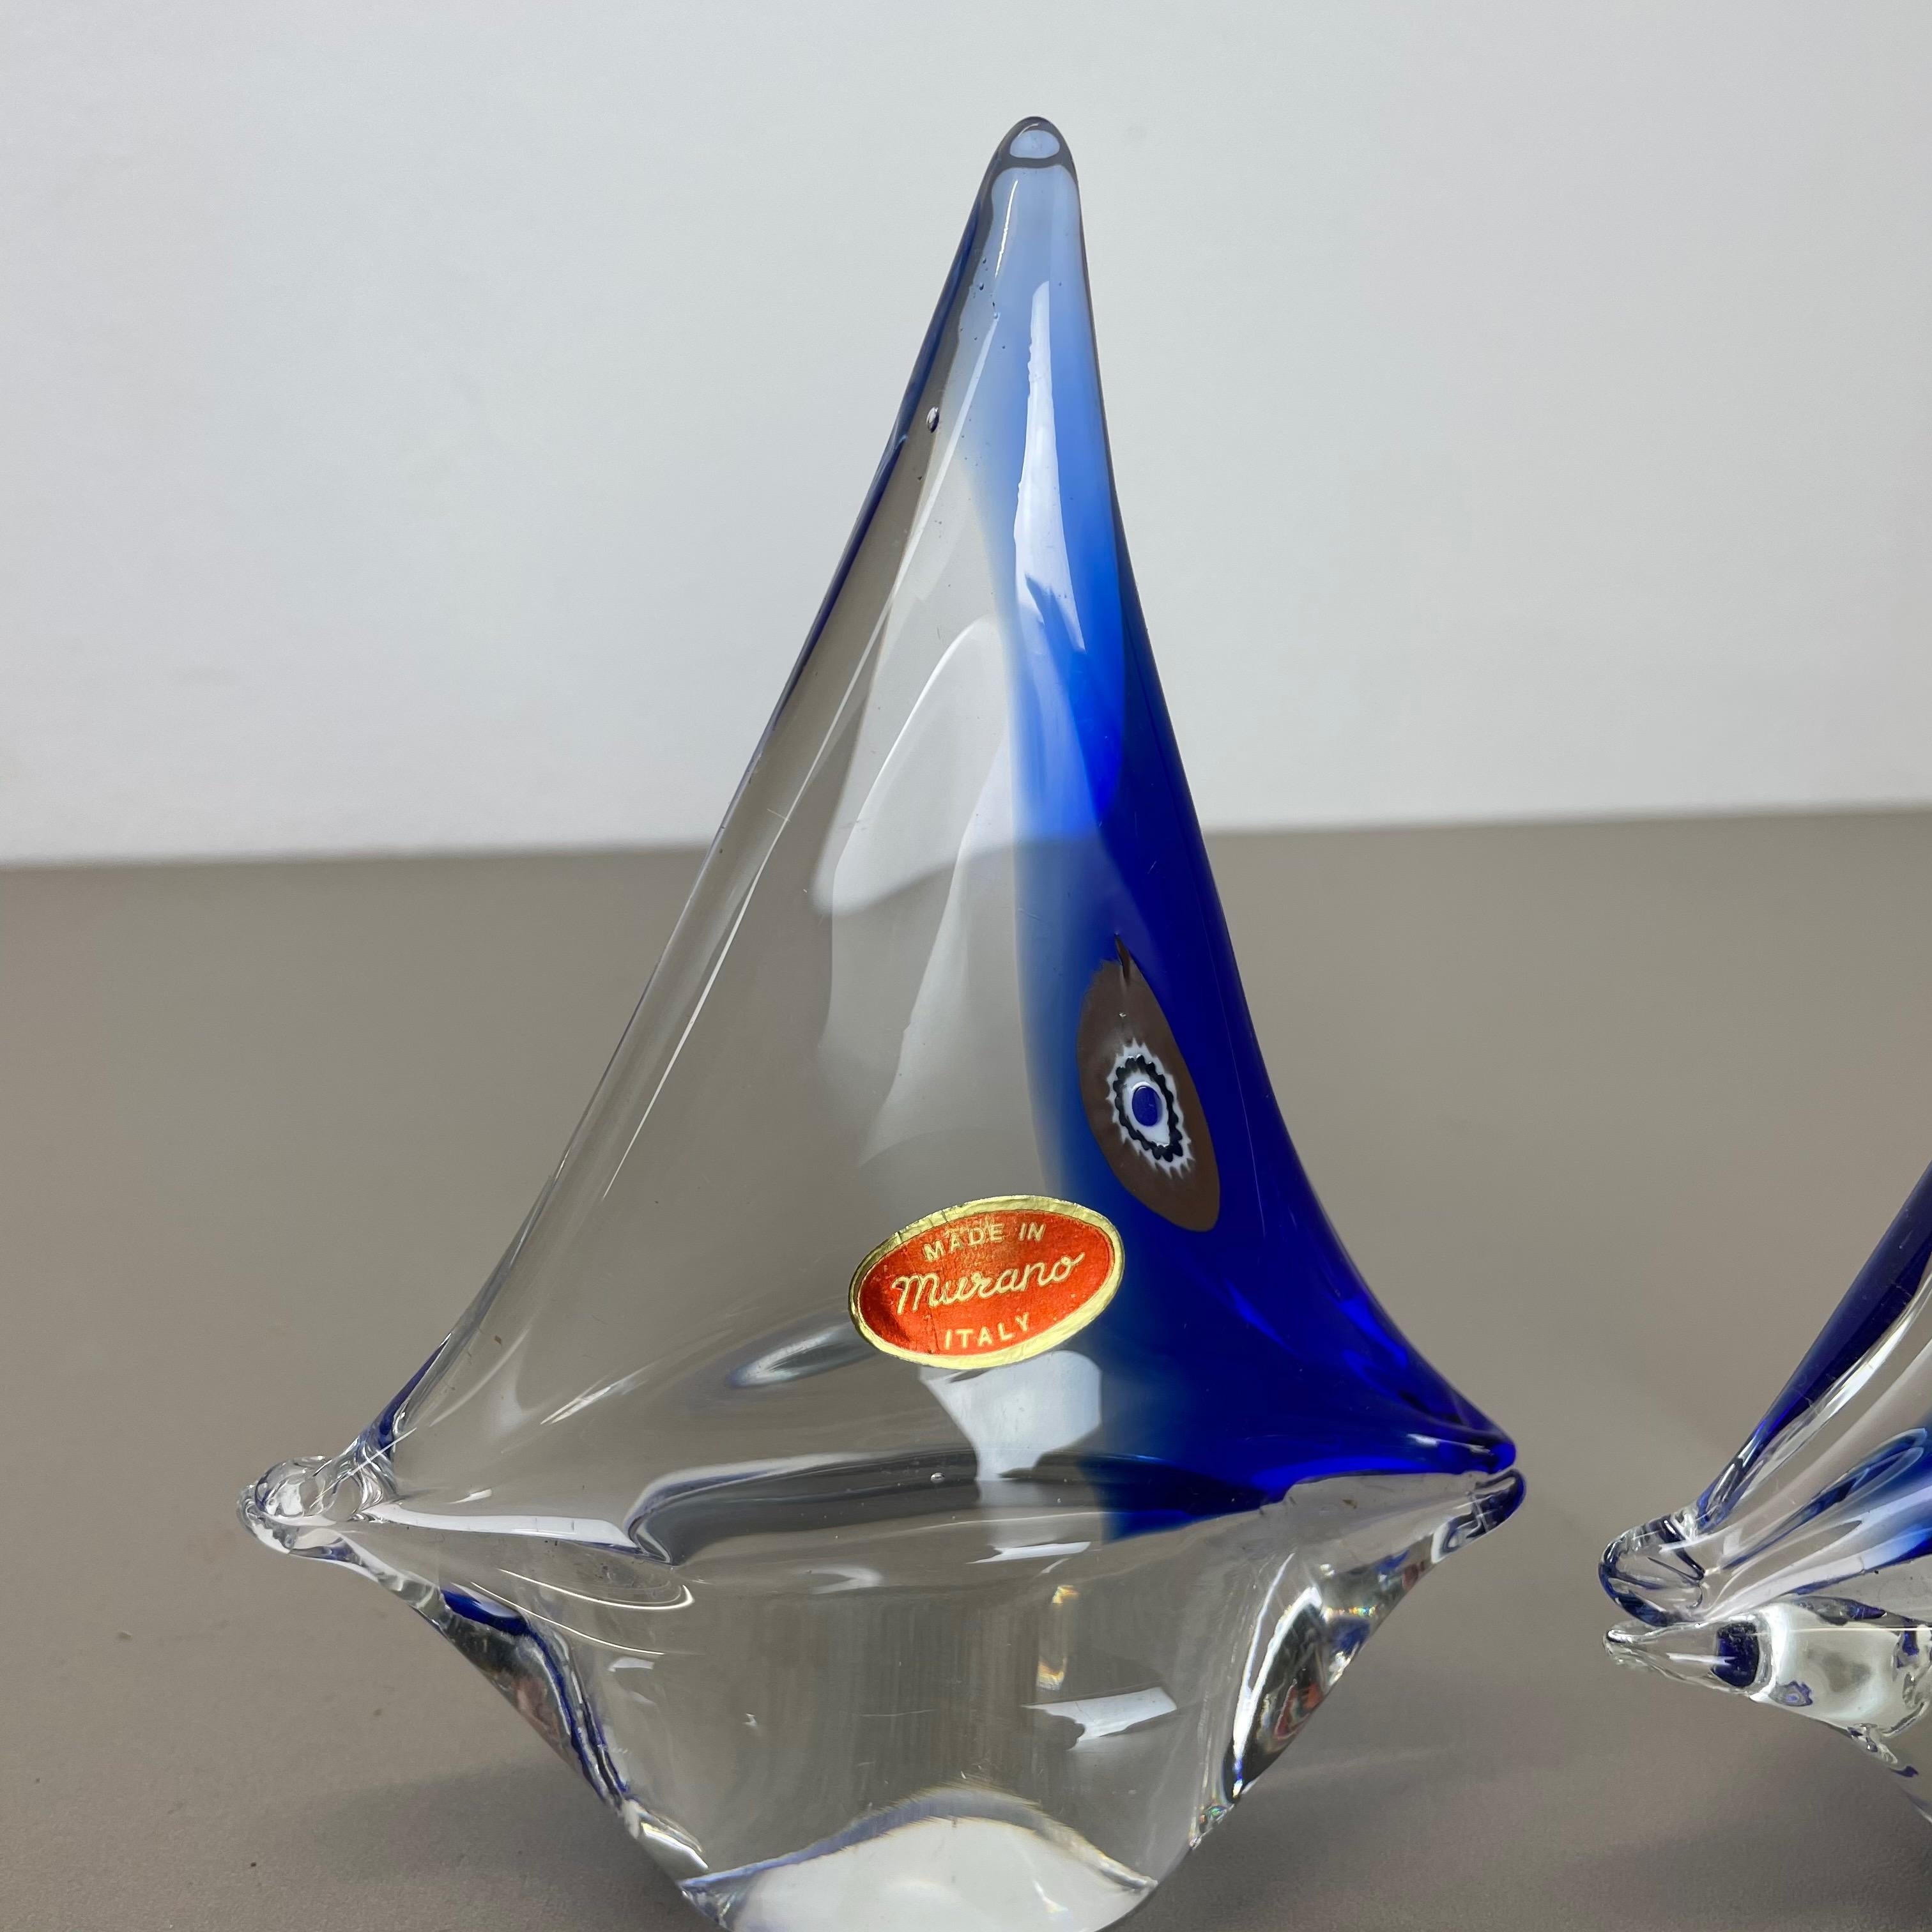 20th Century Set of 2 Murano Glass Sailing Boats Ship Elements, Murano, Italy 1970 For Sale